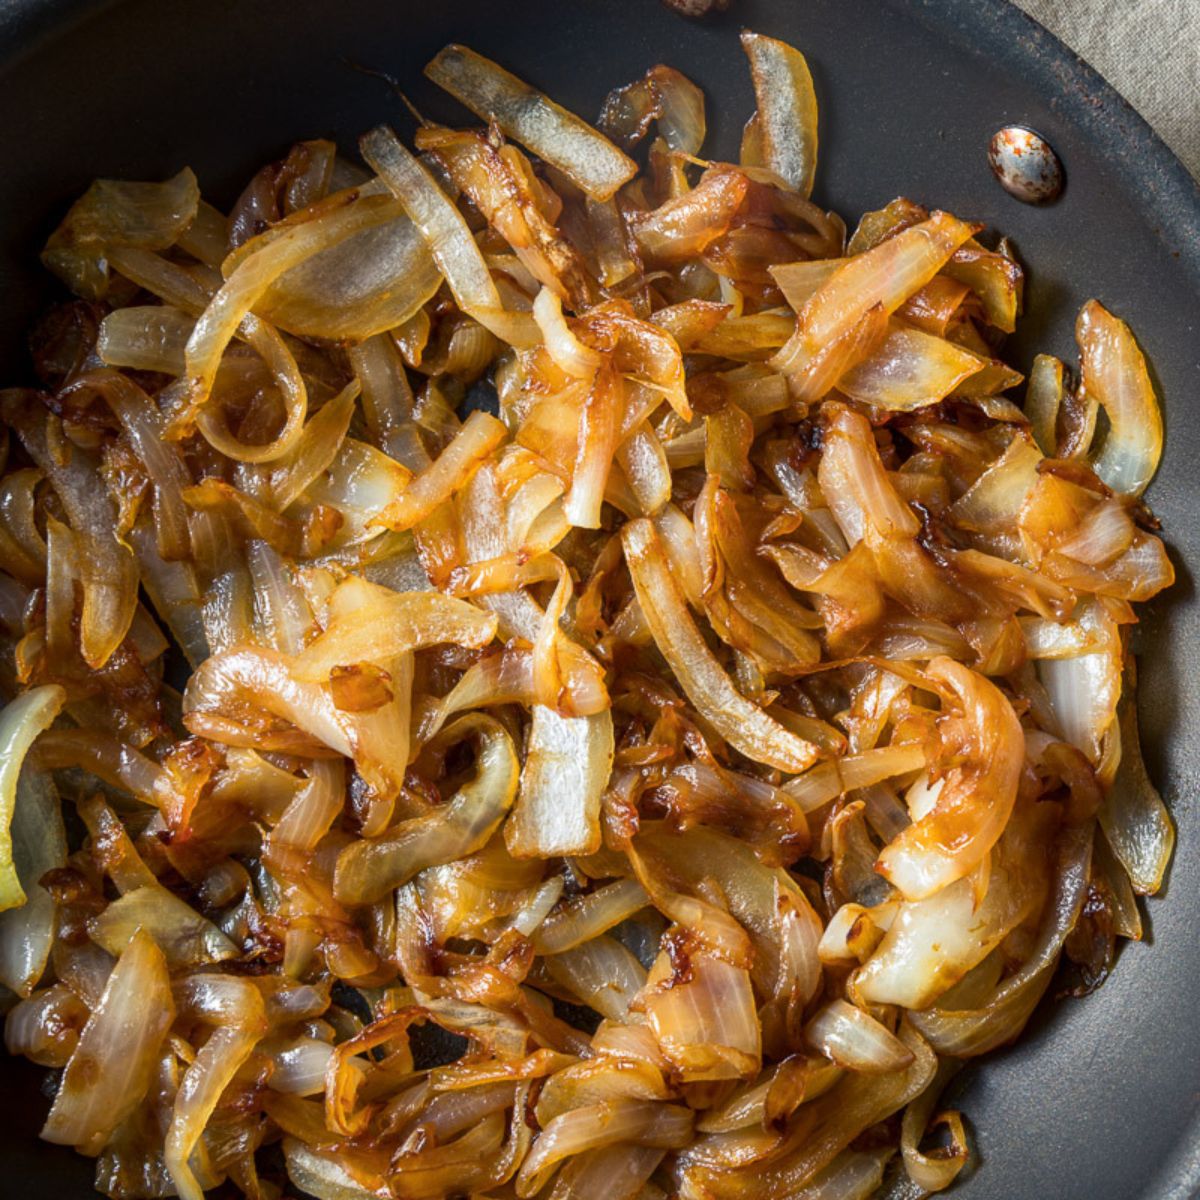 Caramelization 101: How to Perfectly Caramelize Bananas, Onions, Carrots, and Apples